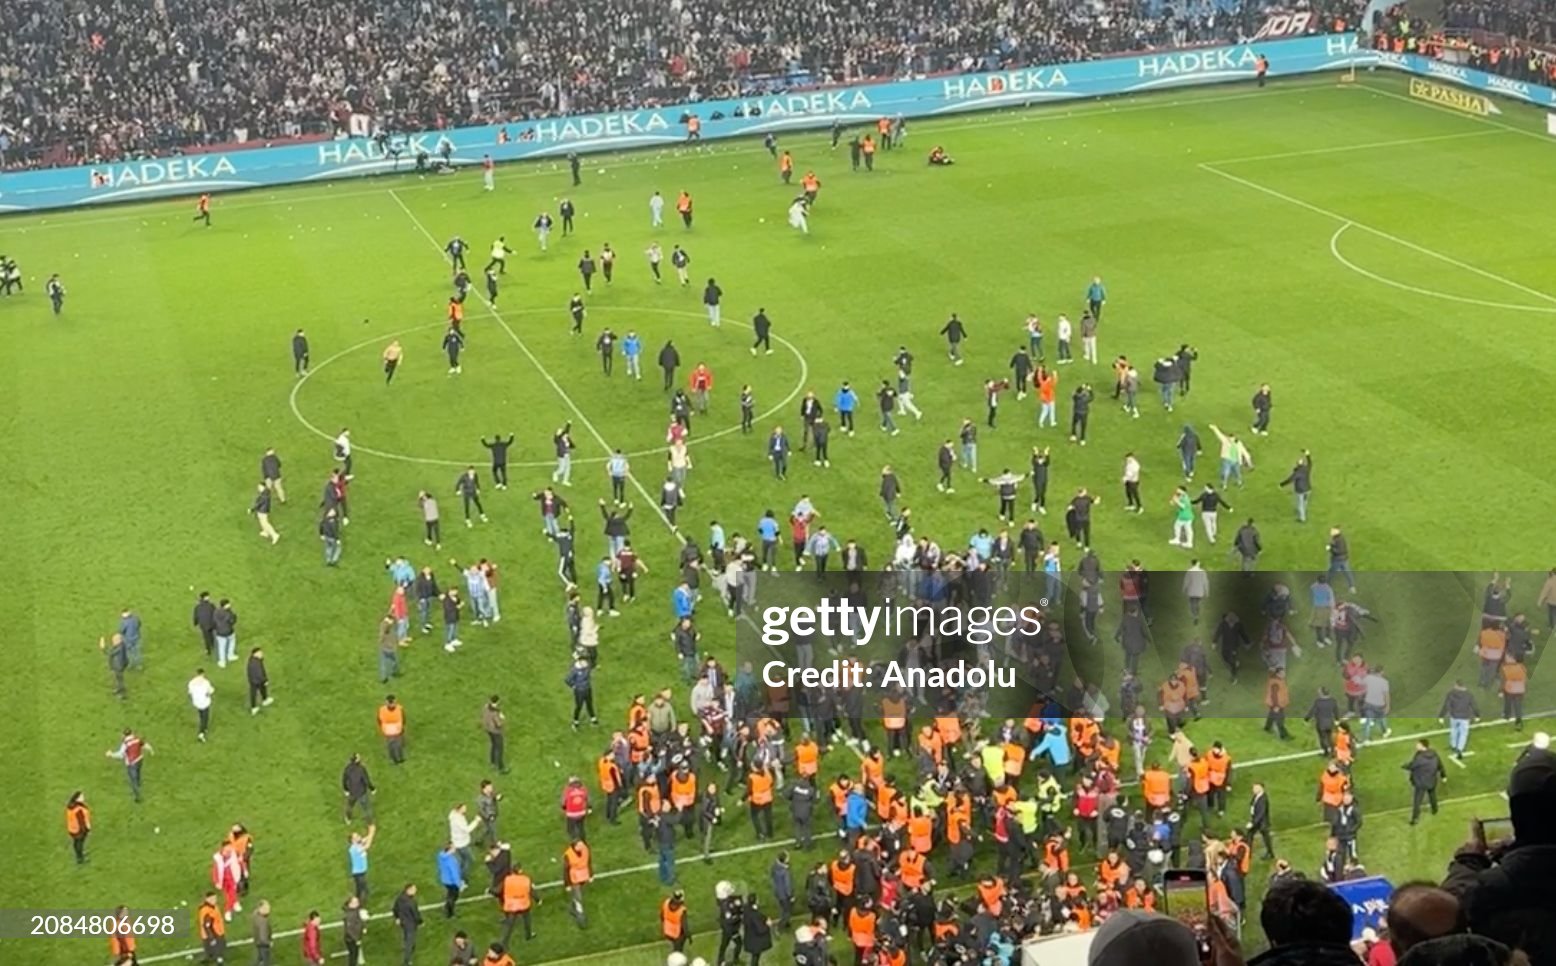 Clashes in Trabzonspor-Fenerbahçe: 12 fans were detained